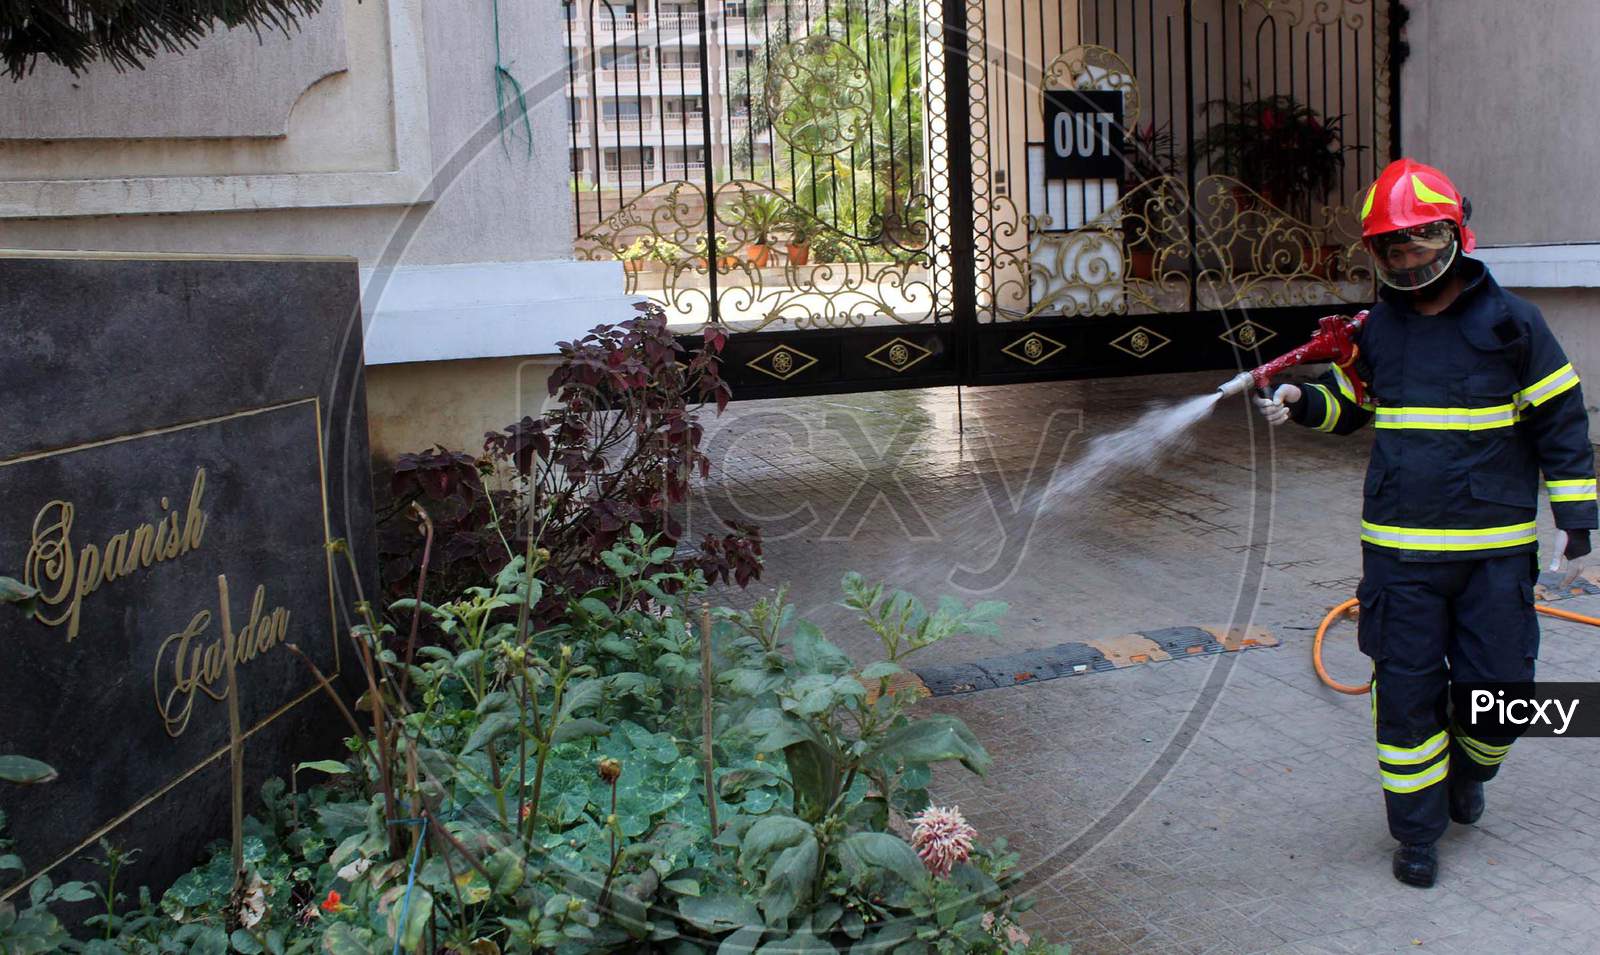 Firefighters Spray Disinfectantsthe Main Entrance Of A Residential Complex (Spanish Garden) During A Nationwide Lockdown In The Wake Of Coronavirus Outbreak, In Guwahati, Saturday, April 4, 2020. Reportedly, One Person Living In The Complex Tested Postive For Covid-19.